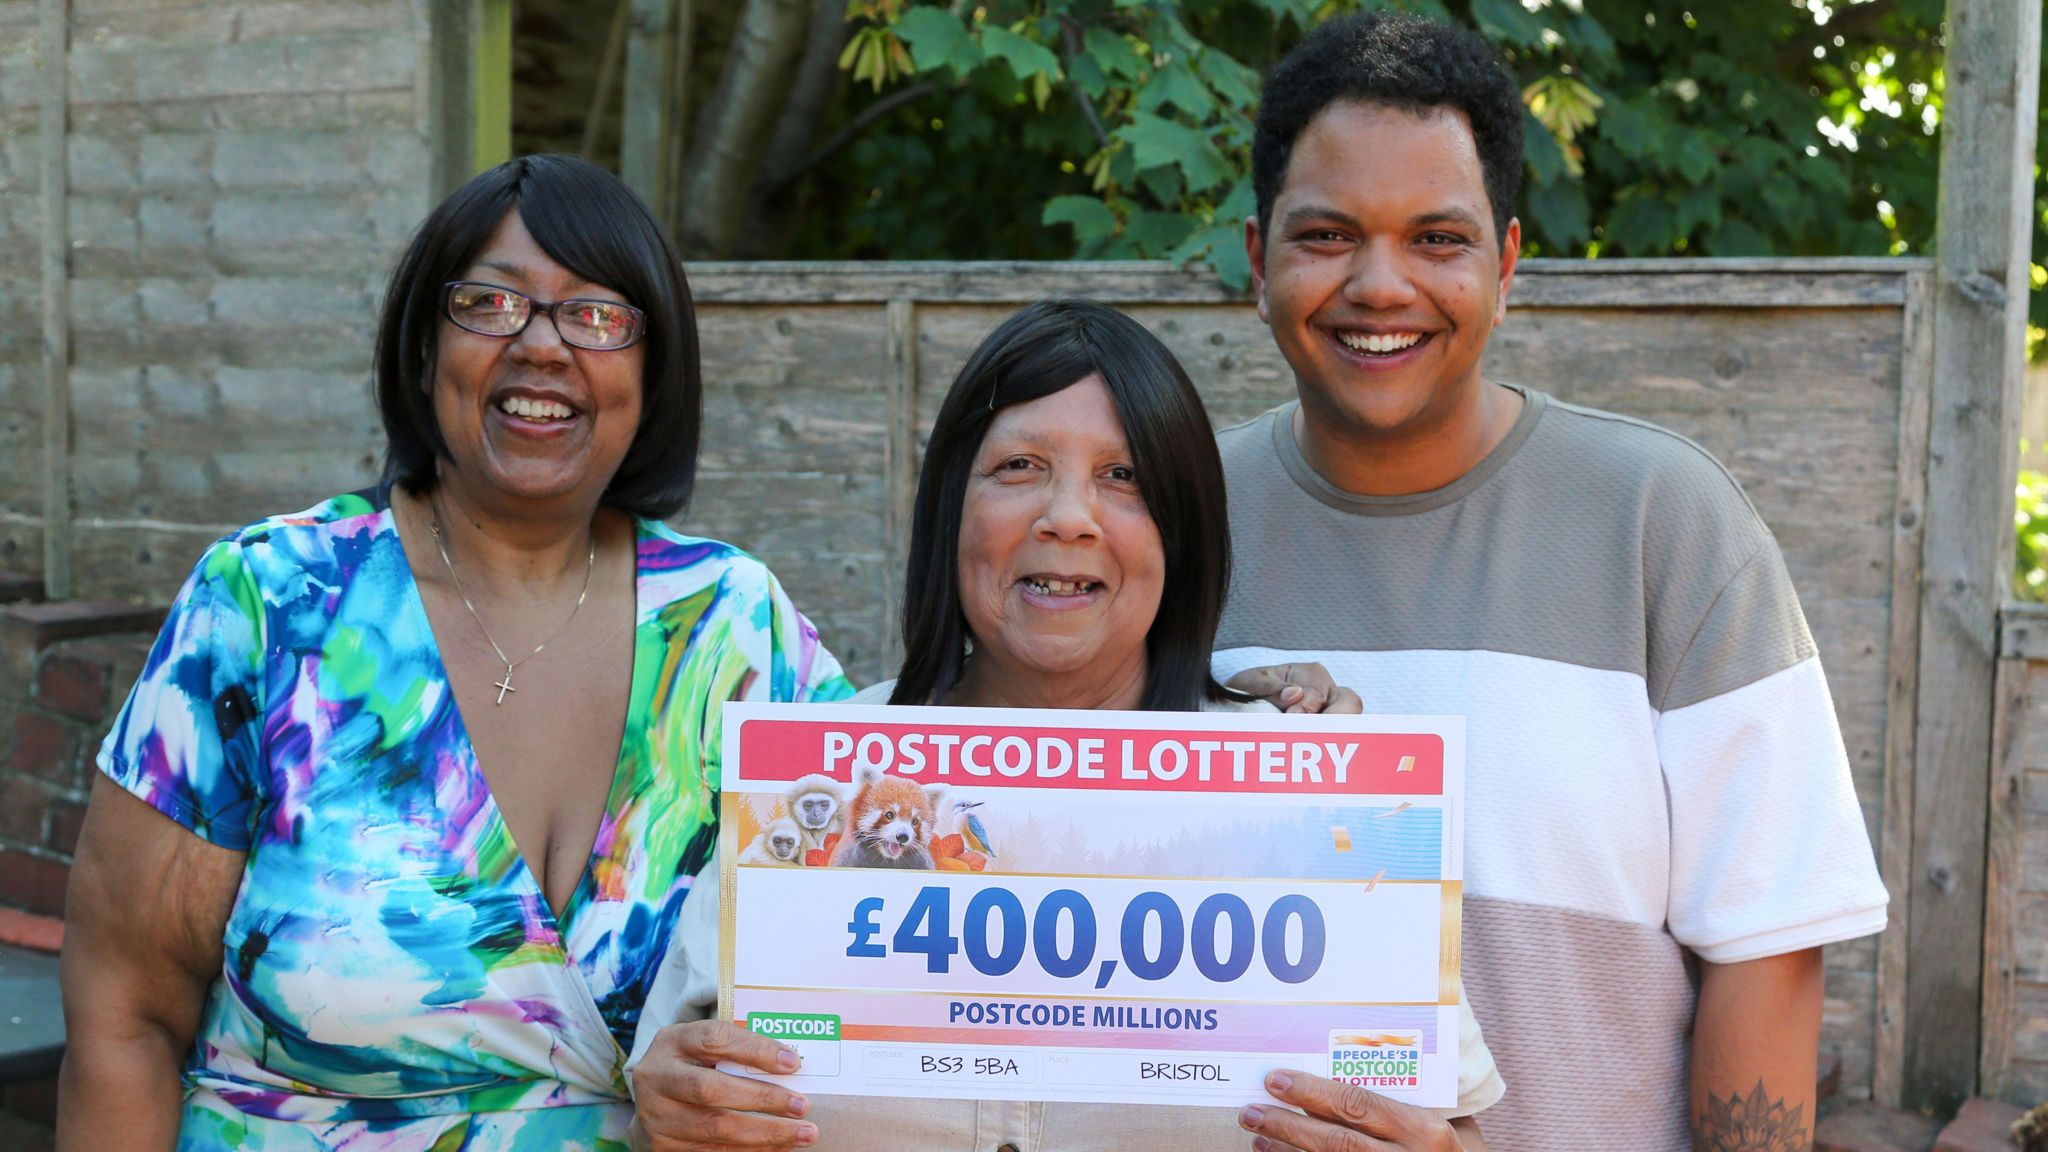 (L-R) Catherine Joseph, wearing a white flowery dress, Celestina Joseph, holding a big cheque with £400,000 written on it,  and Jack Joseph, wearing a striped grey, white and pink t-shirt.